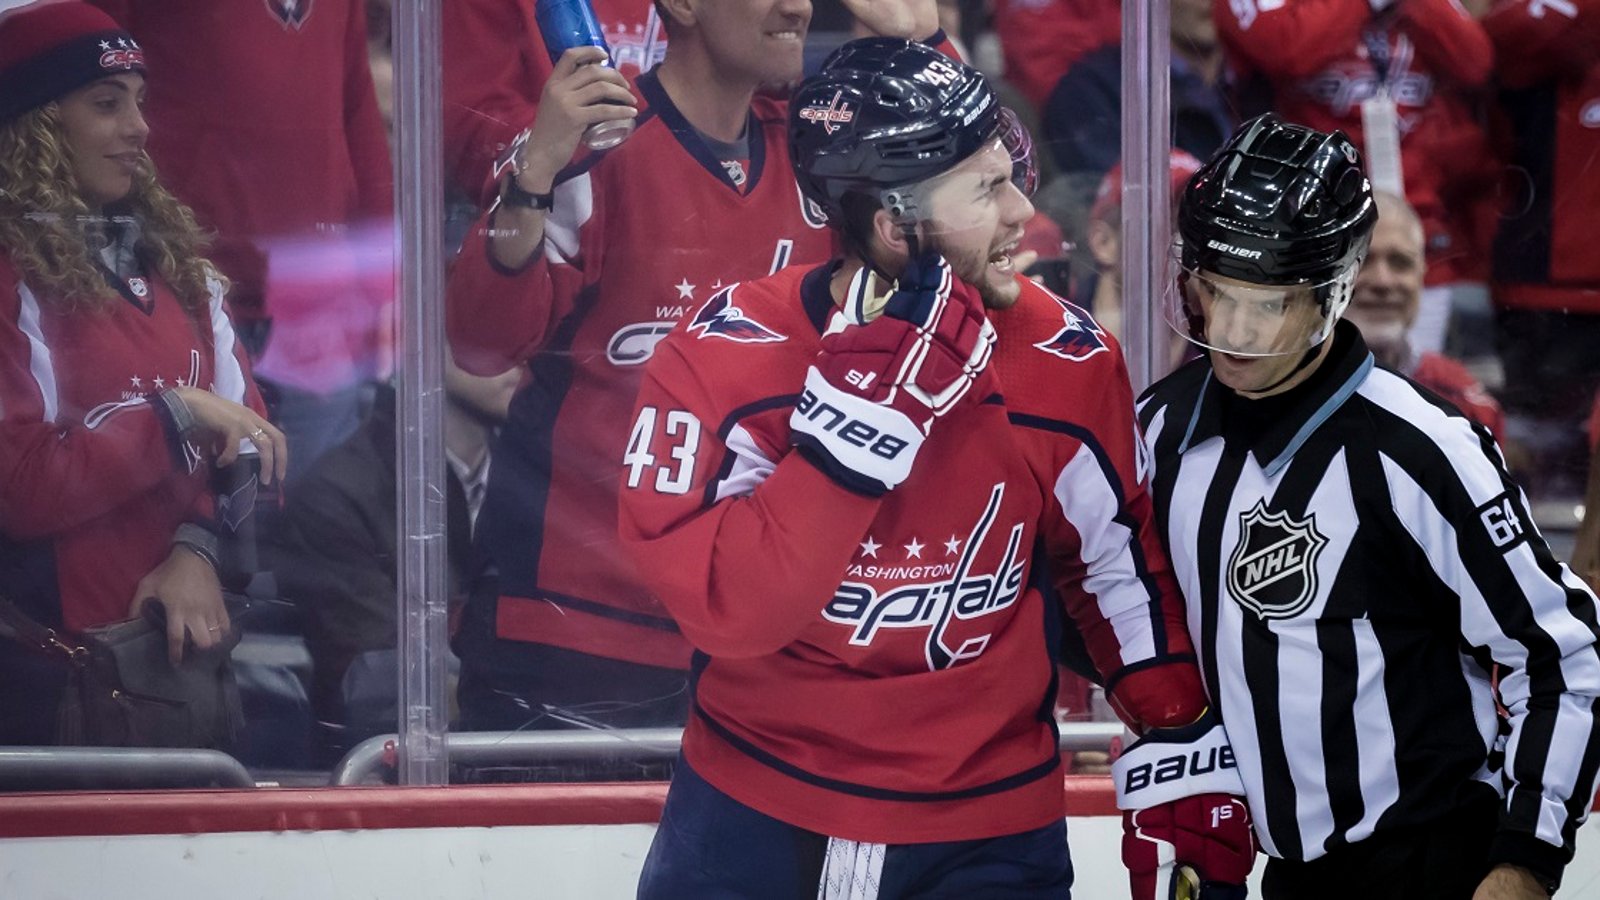 Breaking: NHL announces ruling on Tom Wilson's hit from last night.